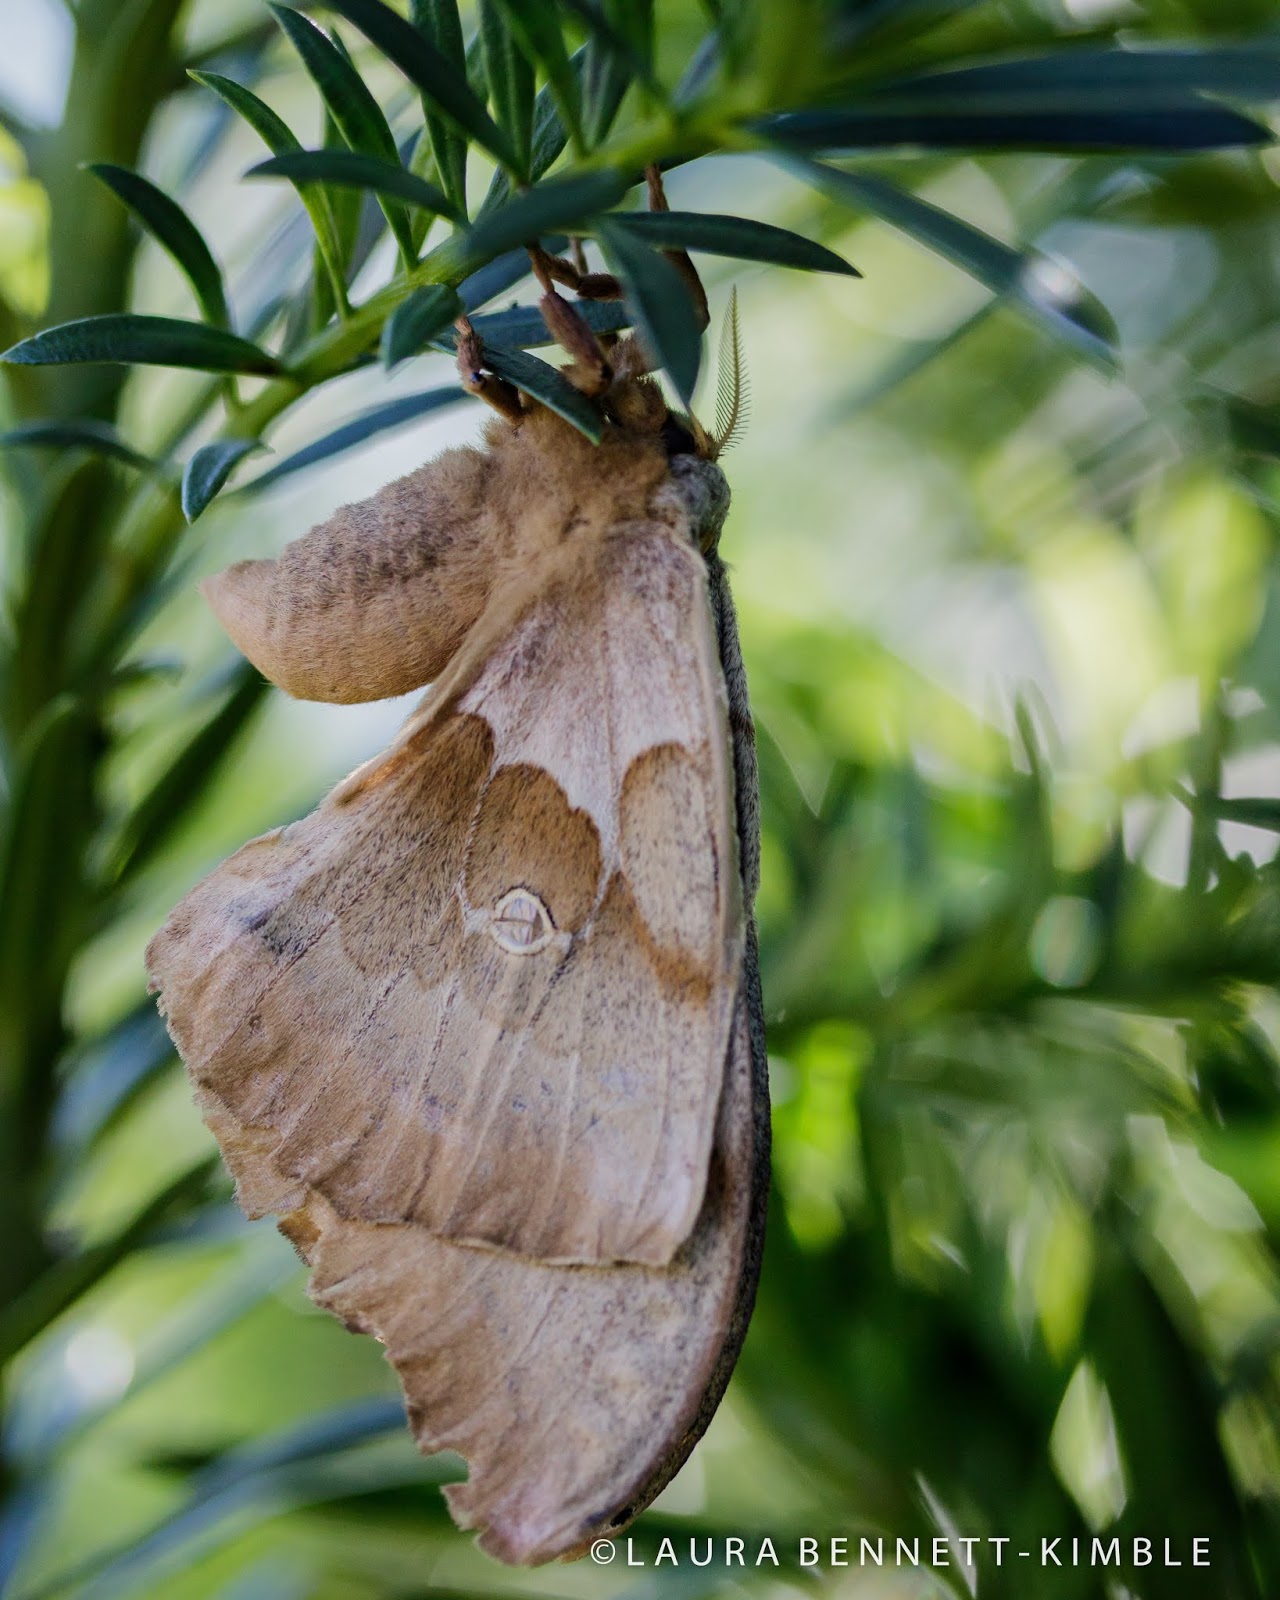 White cedar moth  Agriculture and Food